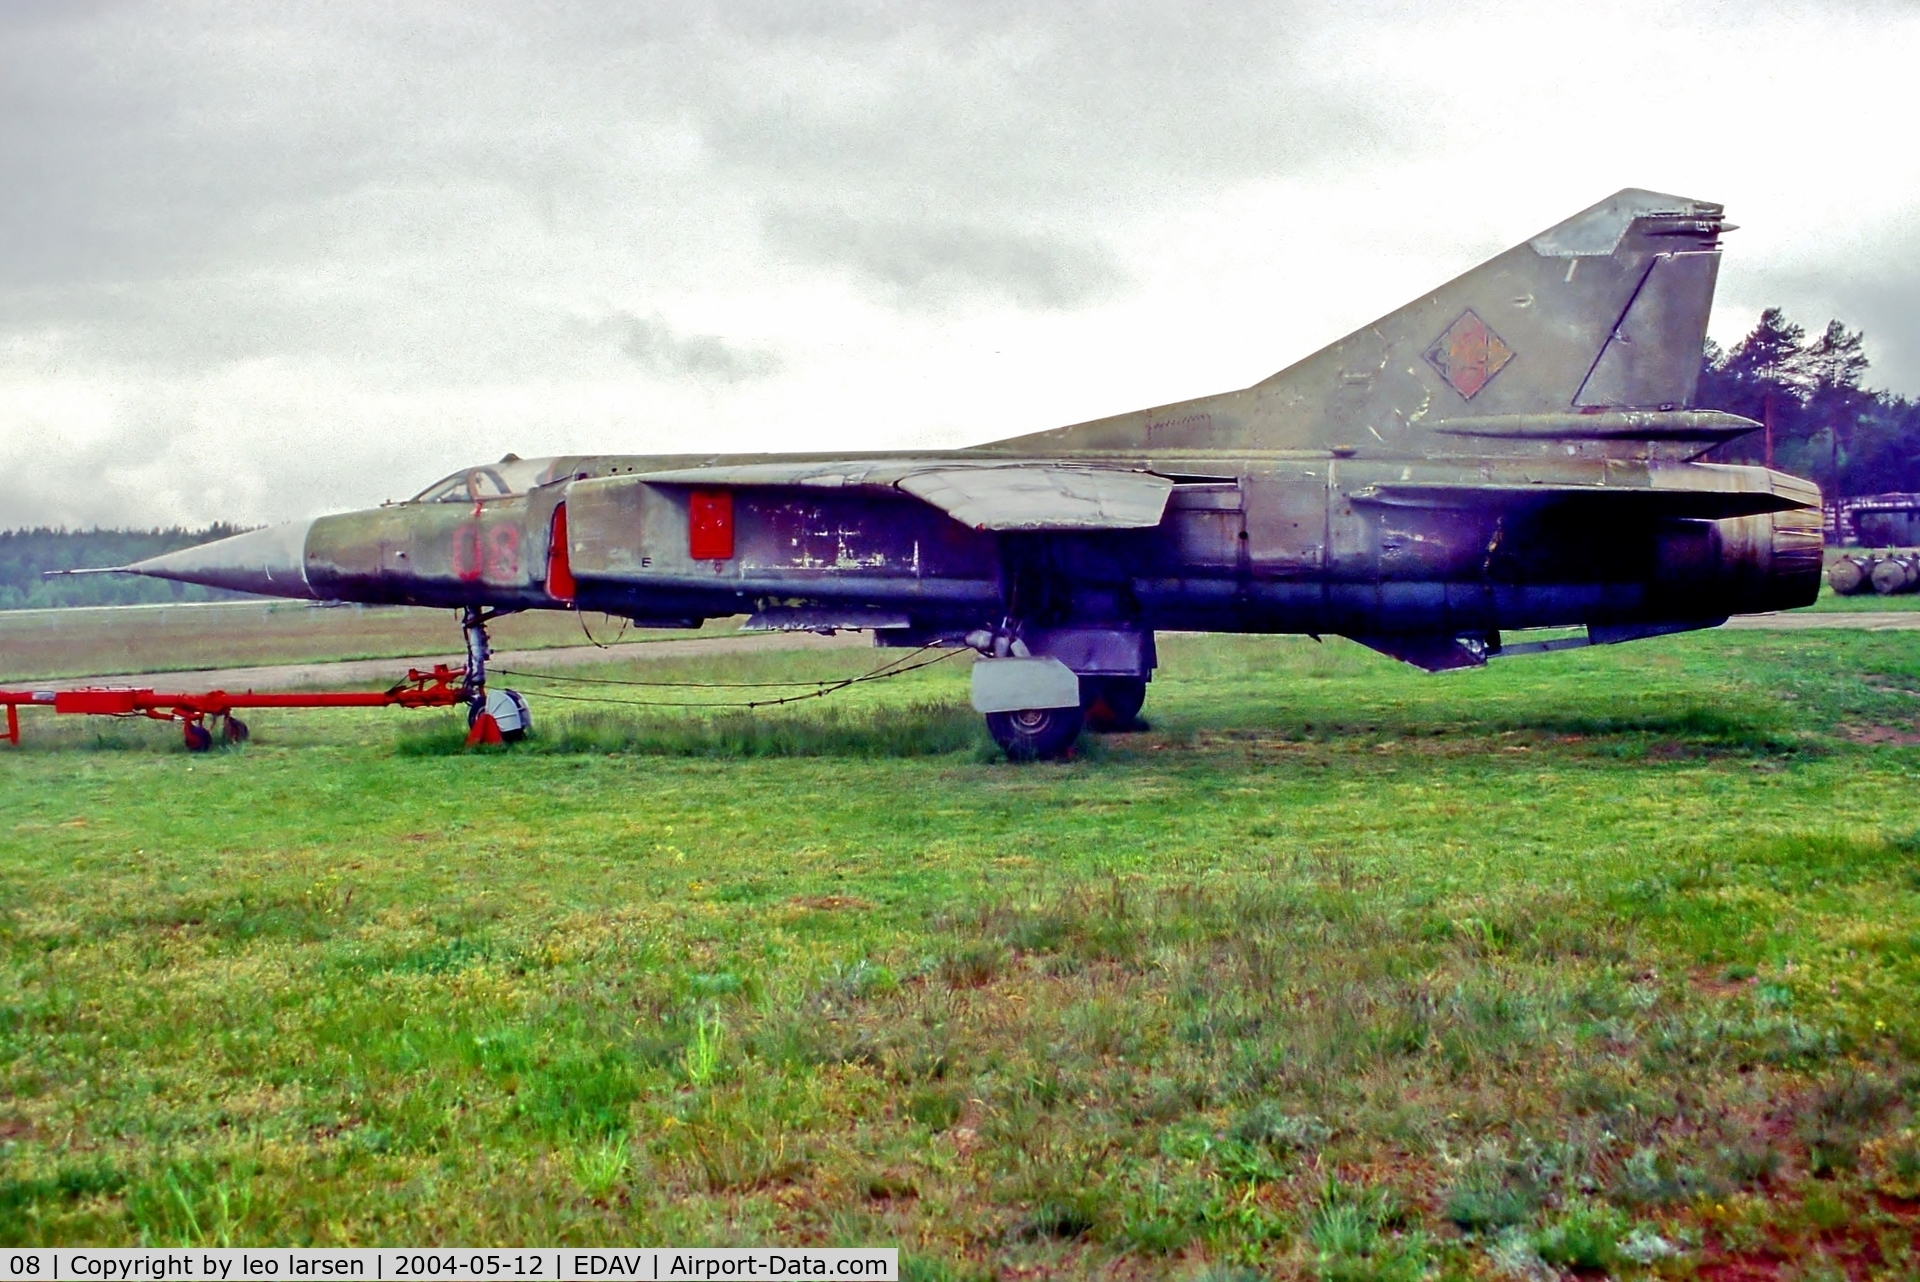 08, Mikoyan-Gurevich MiG-23S C/N 220001013, Finow Air Museum Germany 12.5.04